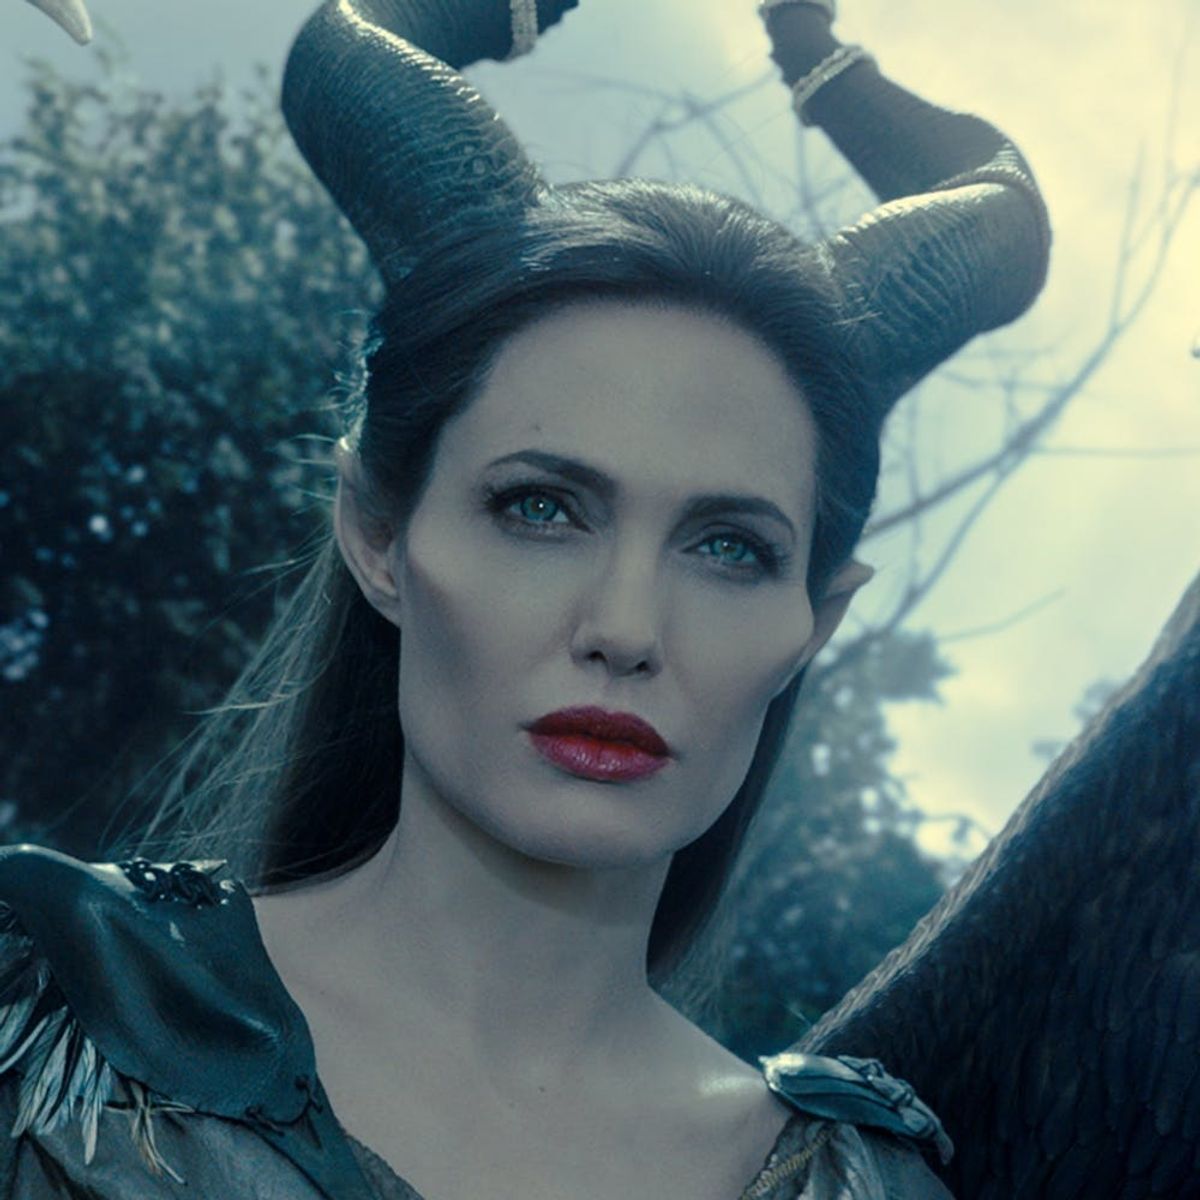 Disney Just Announced New Release Dates for ‘Maleficent 2,’ ‘Mary Poppins Returns,’ and More